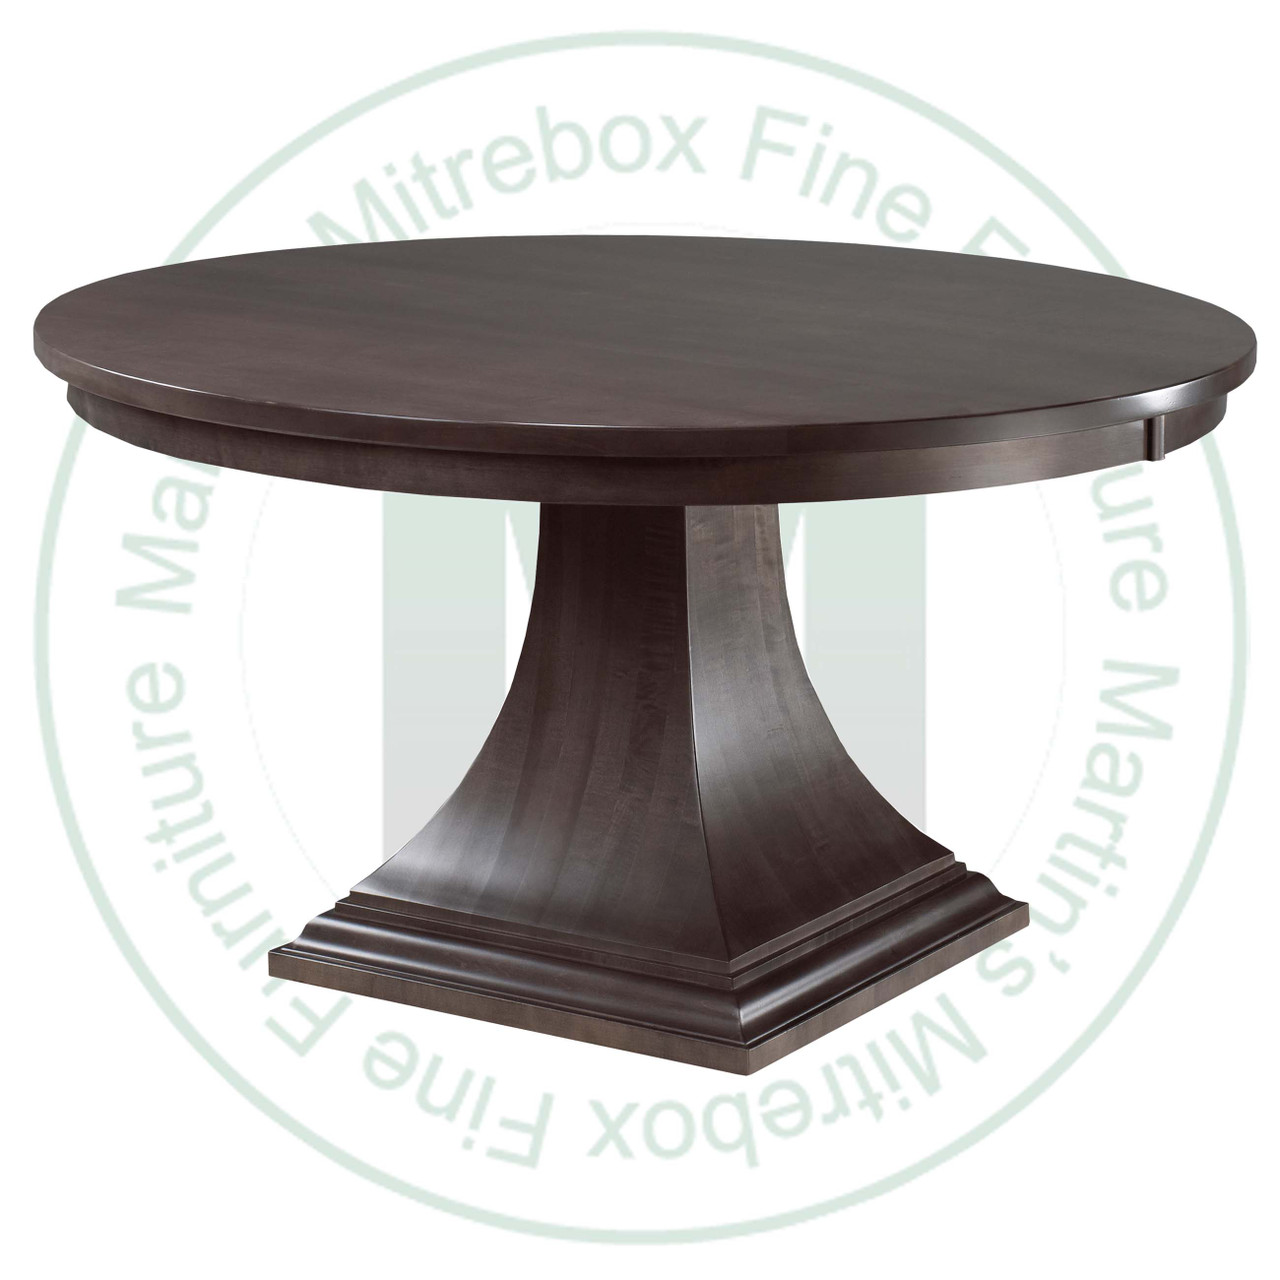 Wormy Maple Key West Single Pedestal Table 54''D x 54''W x 30''H With 1 - 12'' Leaf Table Table Has 1'' Thick Top